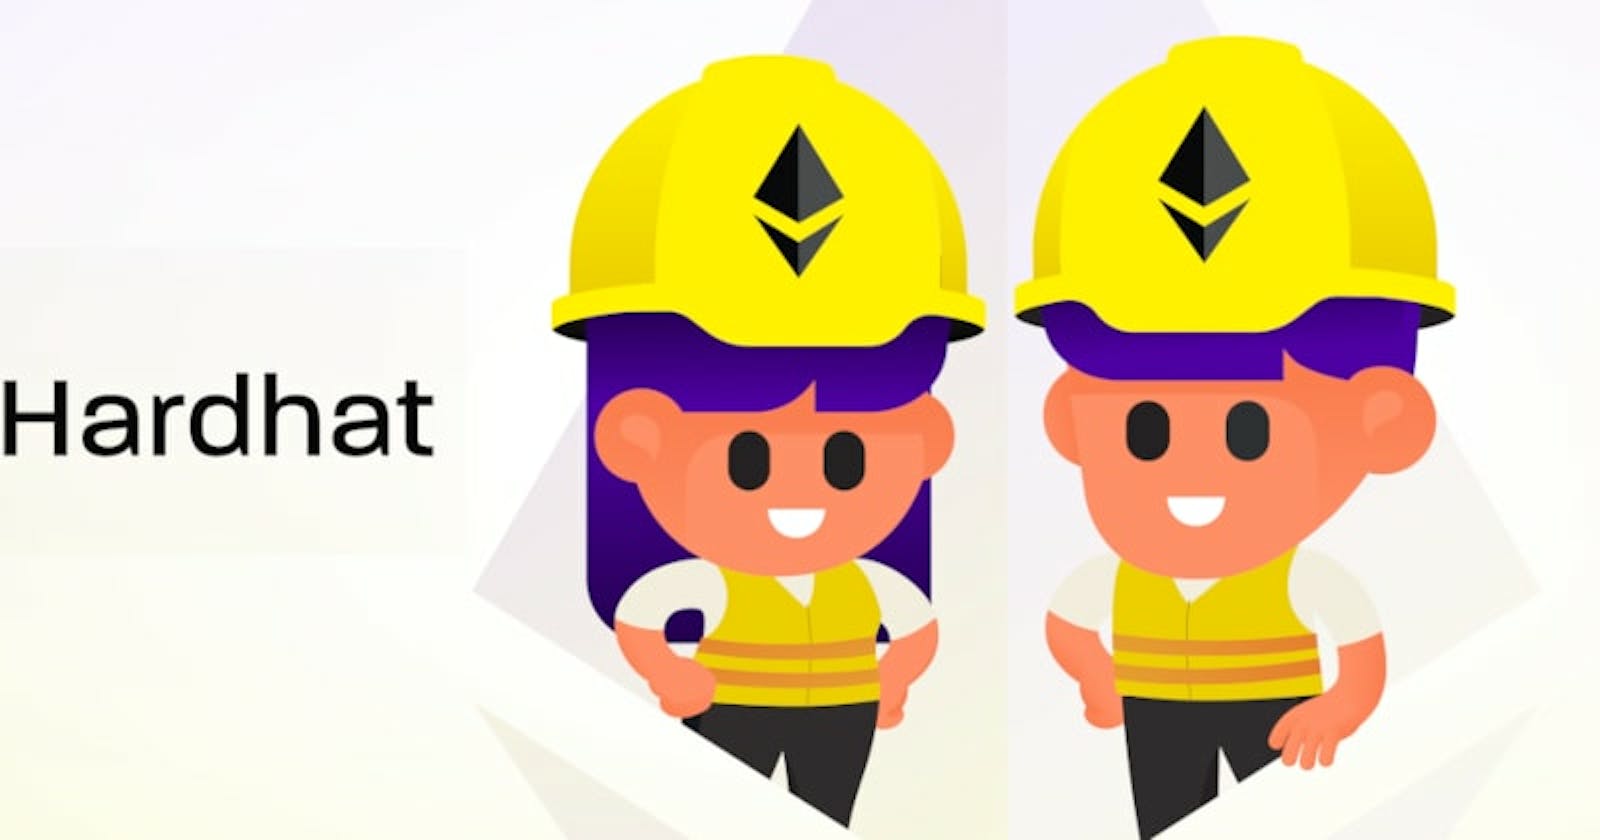 Interact with deployed smart contracts using HardHat console